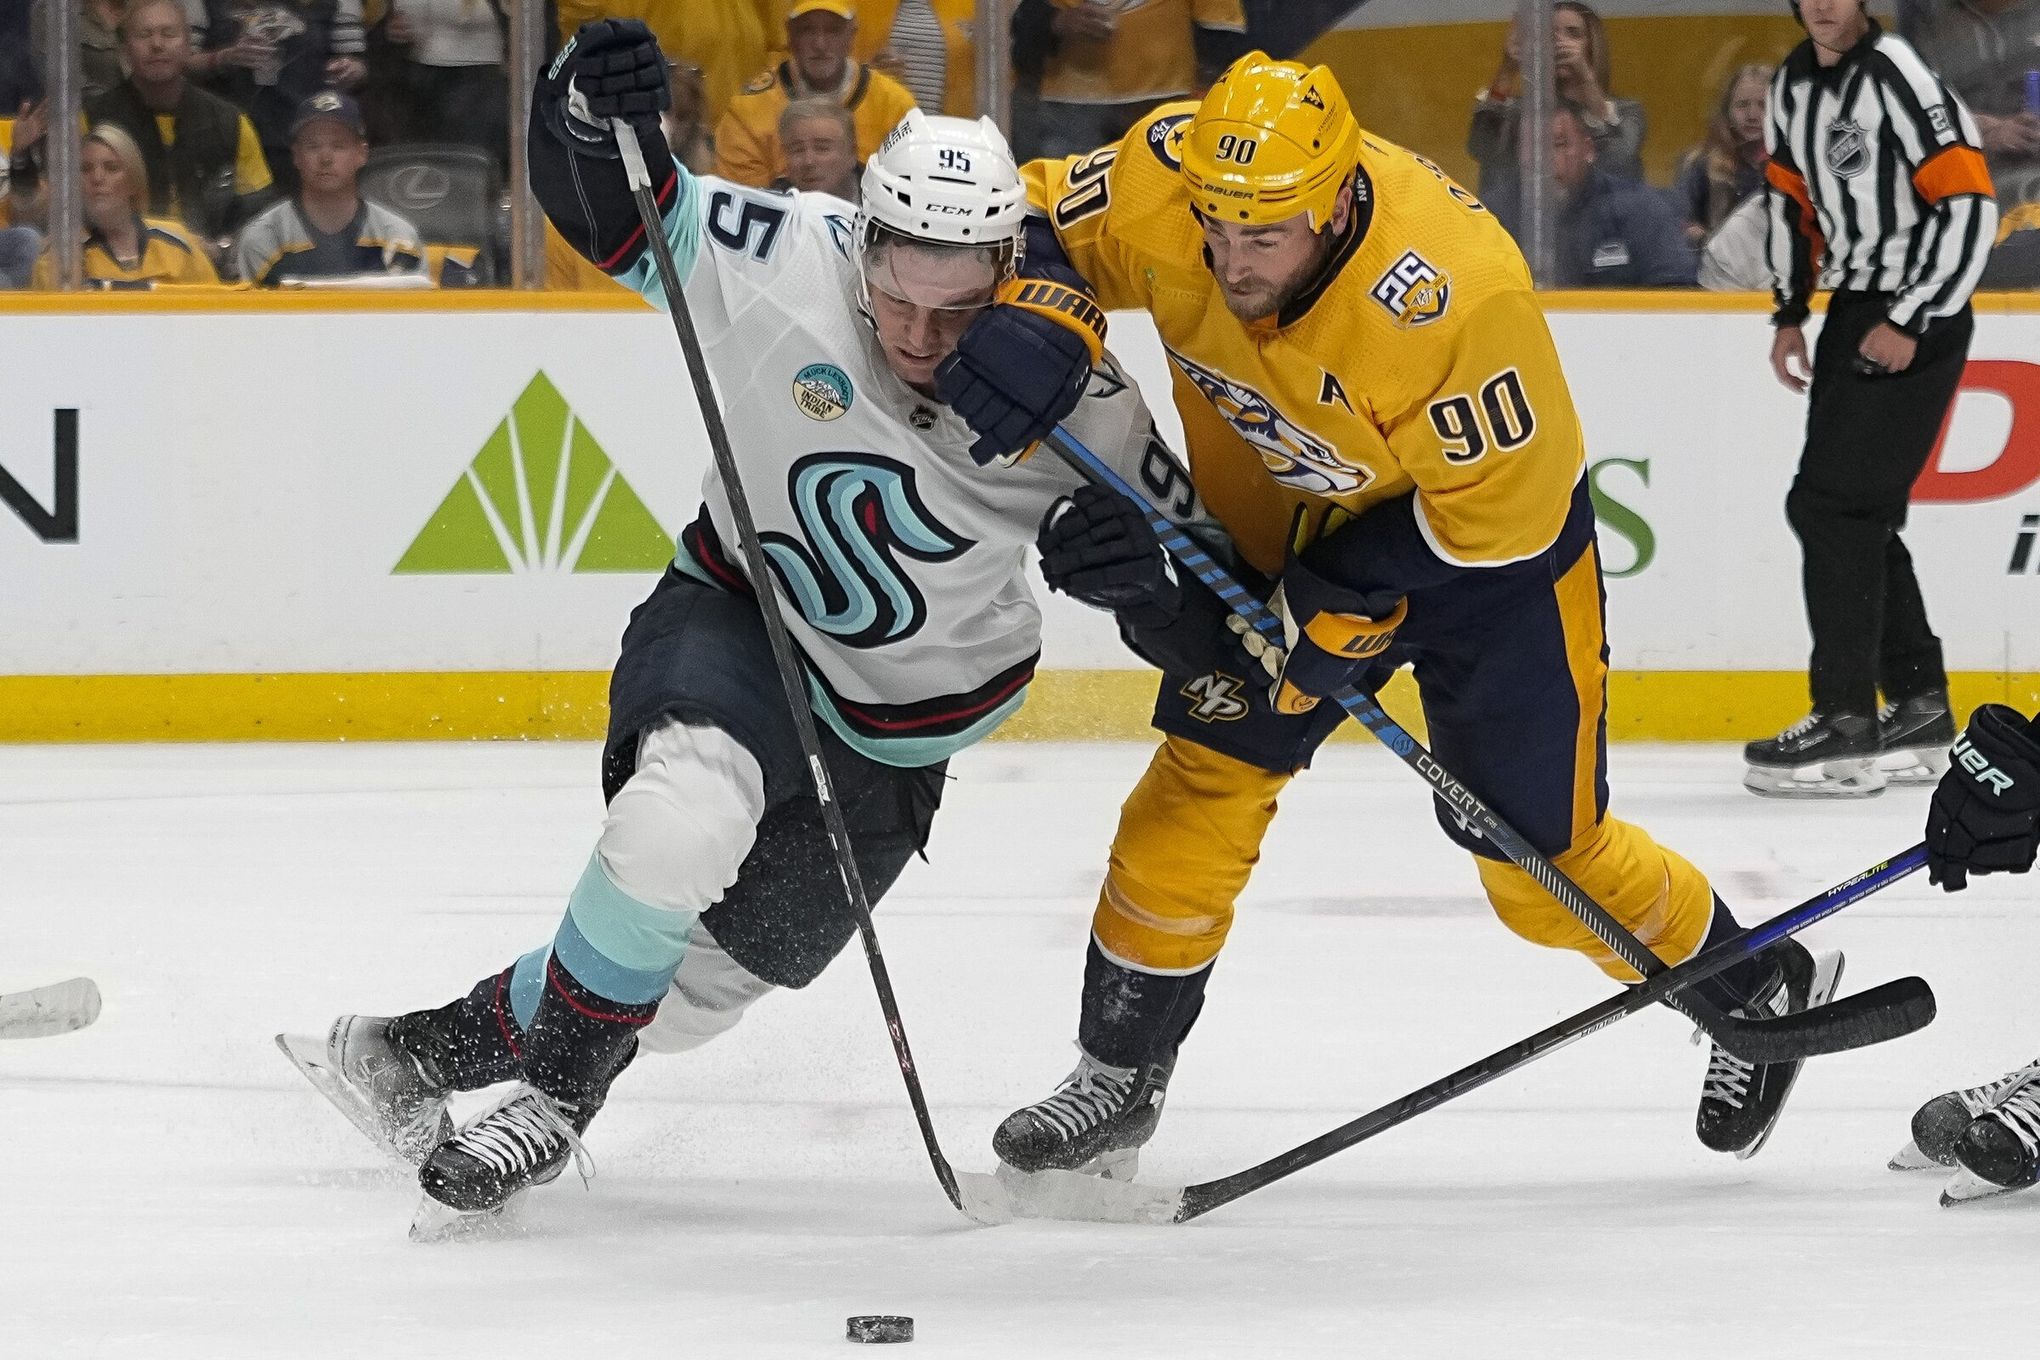 Nashville Predators: Ranking the Top Jerseys in Franchise History - Page 3